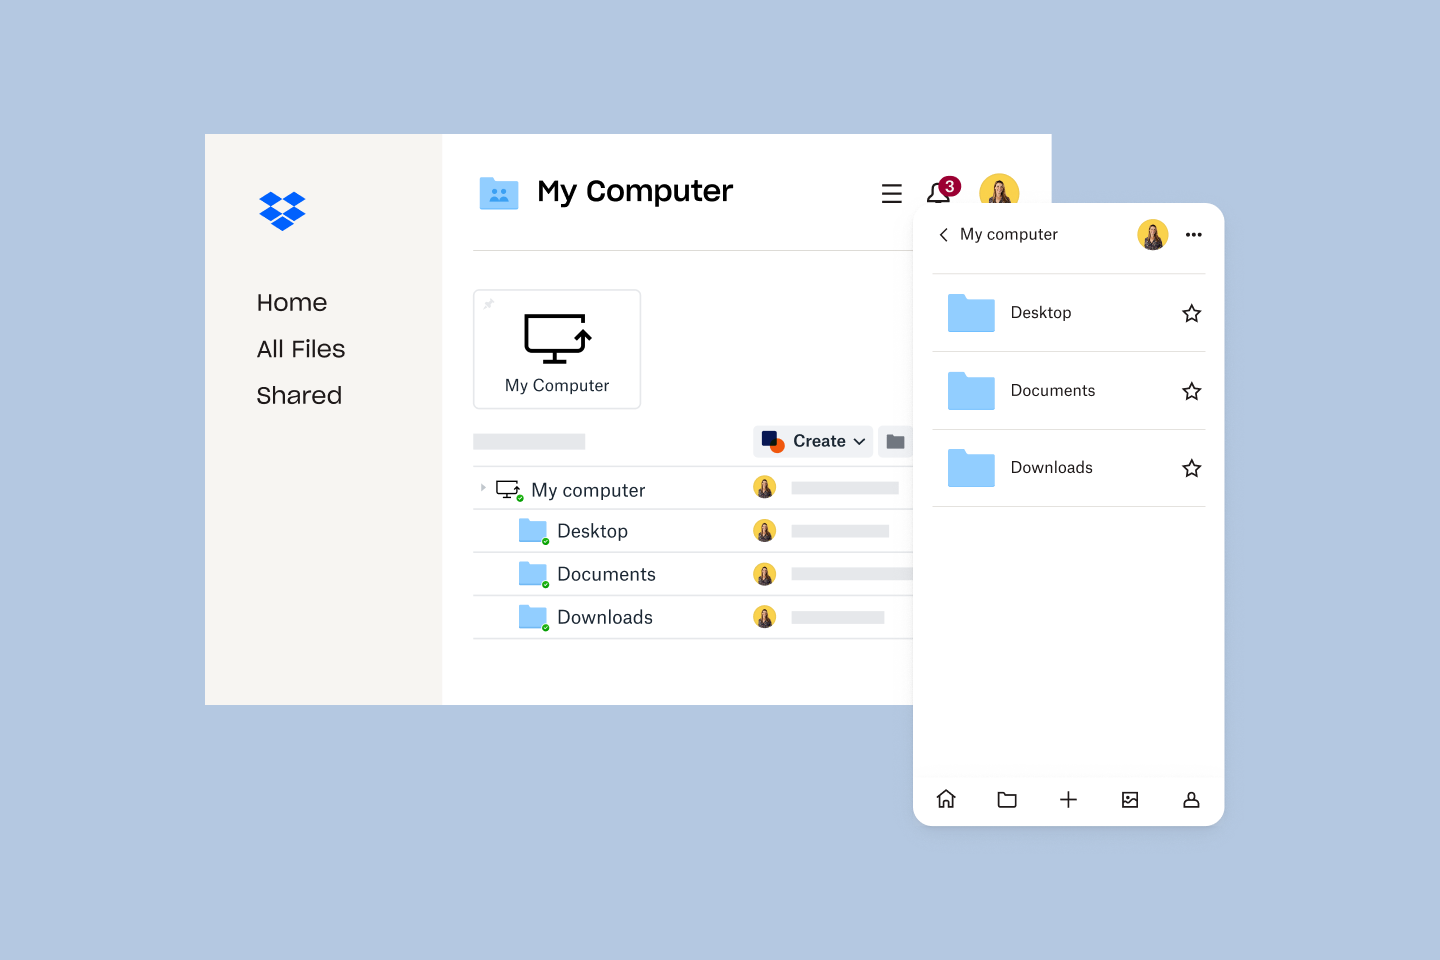 A Dropbox Backup account space with folders for Desktop, Documents, and Downloads